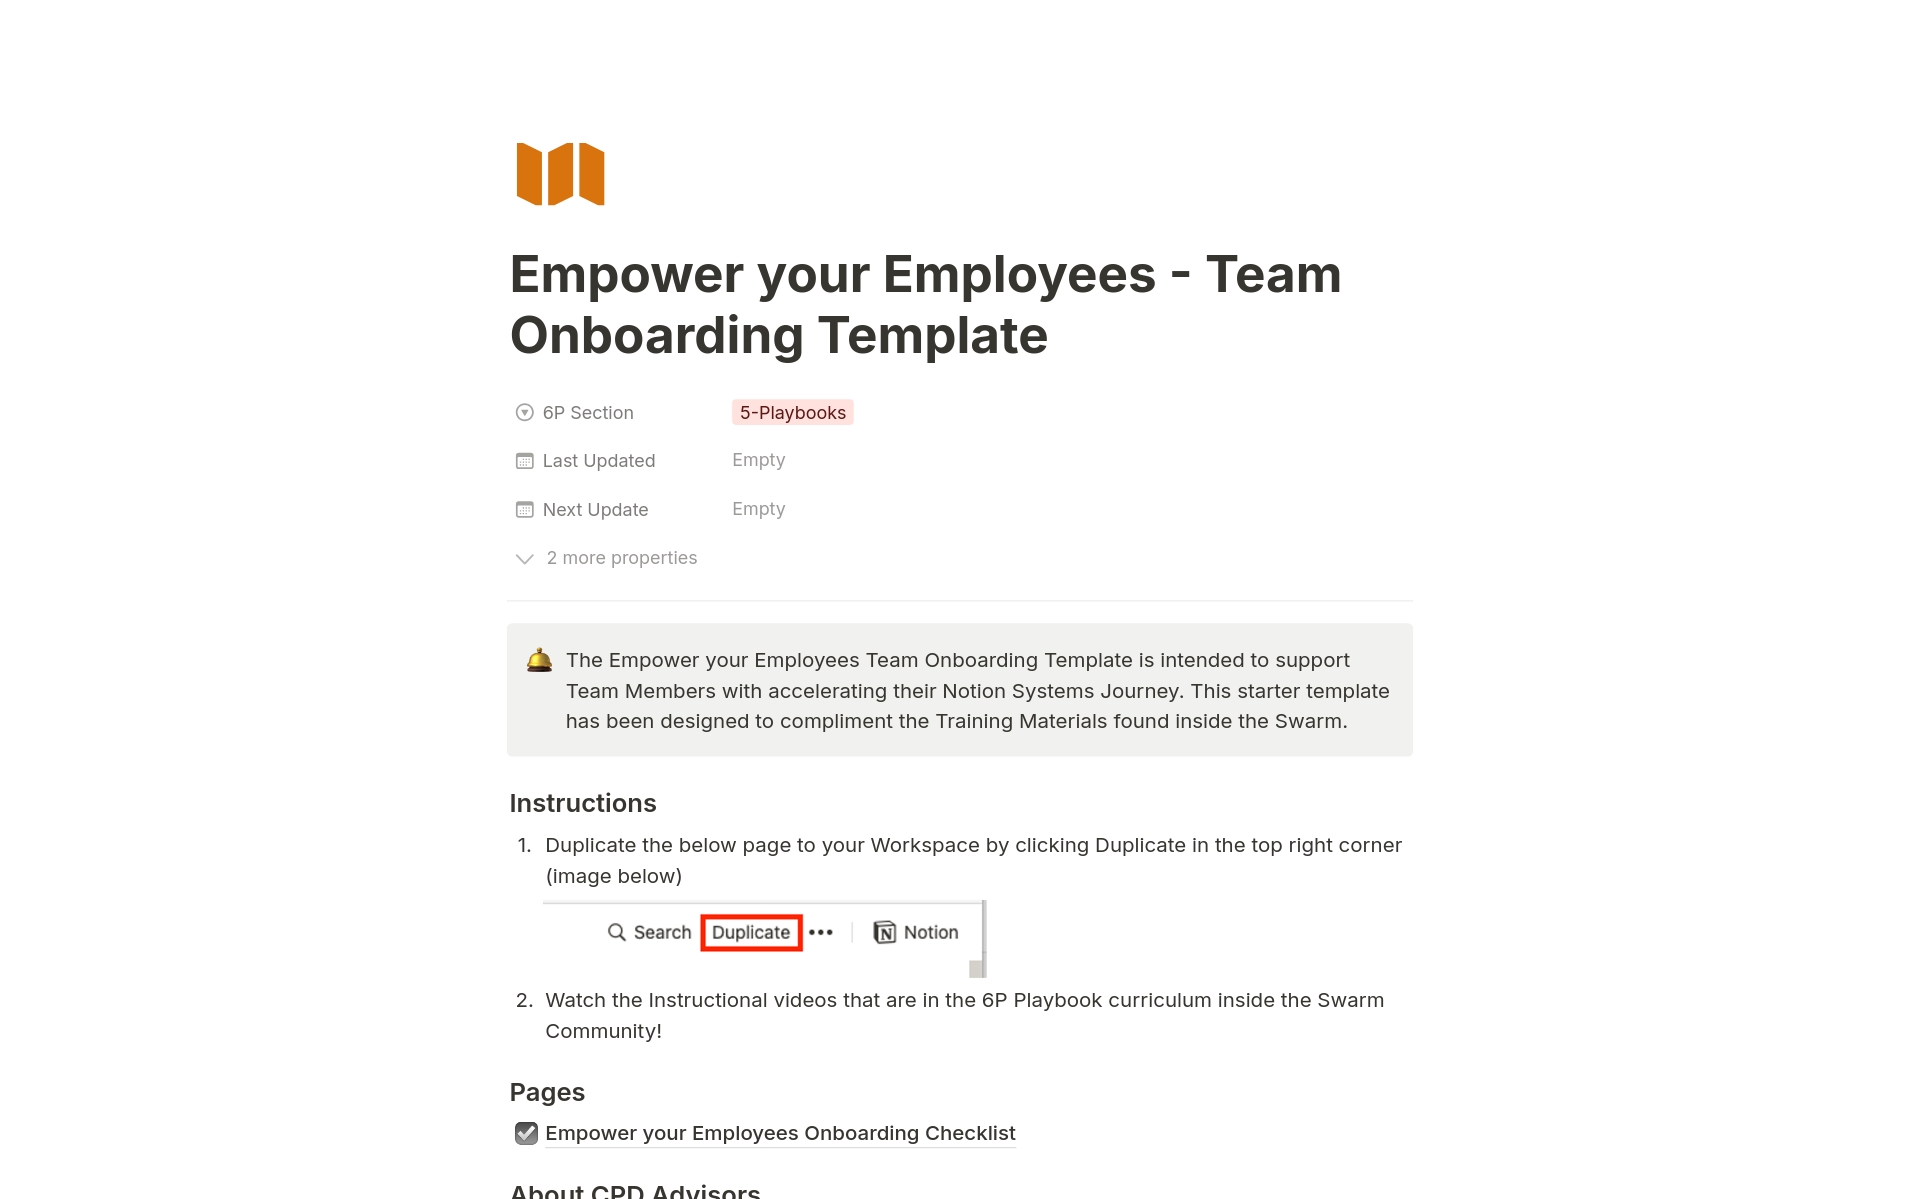 The Empower your Employees Team Onboarding Template is intended to support Team Members with their integration into a new company Journey through a multi-week self-paced journey. 